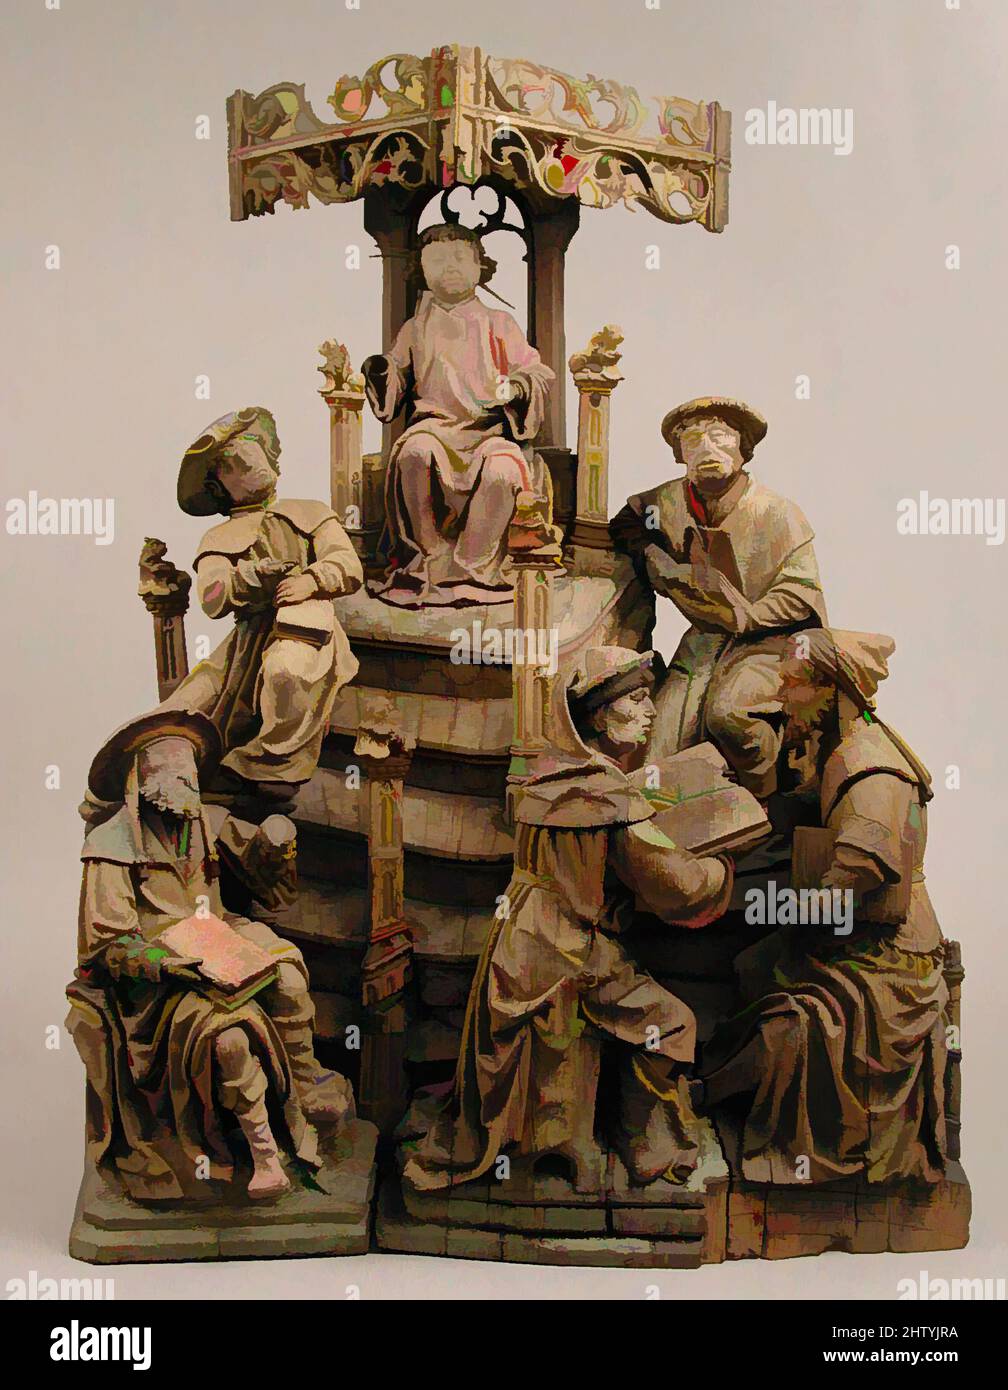 Art inspired by Christ among the Doctors, early 16th century, Made in Lower Rhine, German, Oak, polychromy, parcel gilt, Overall: 26 1/2 x 19 x 11 1/2 in. (67.3 x 48.3 x 29.2 cm), Sculpture-Wood, The twelve-year-old Christ is baffling the elders of the temple with his knowledge. The, Classic works modernized by Artotop with a splash of modernity. Shapes, color and value, eye-catching visual impact on art. Emotions through freedom of artworks in a contemporary way. A timeless message pursuing a wildly creative new direction. Artists turning to the digital medium and creating the Artotop NFT Stock Photo